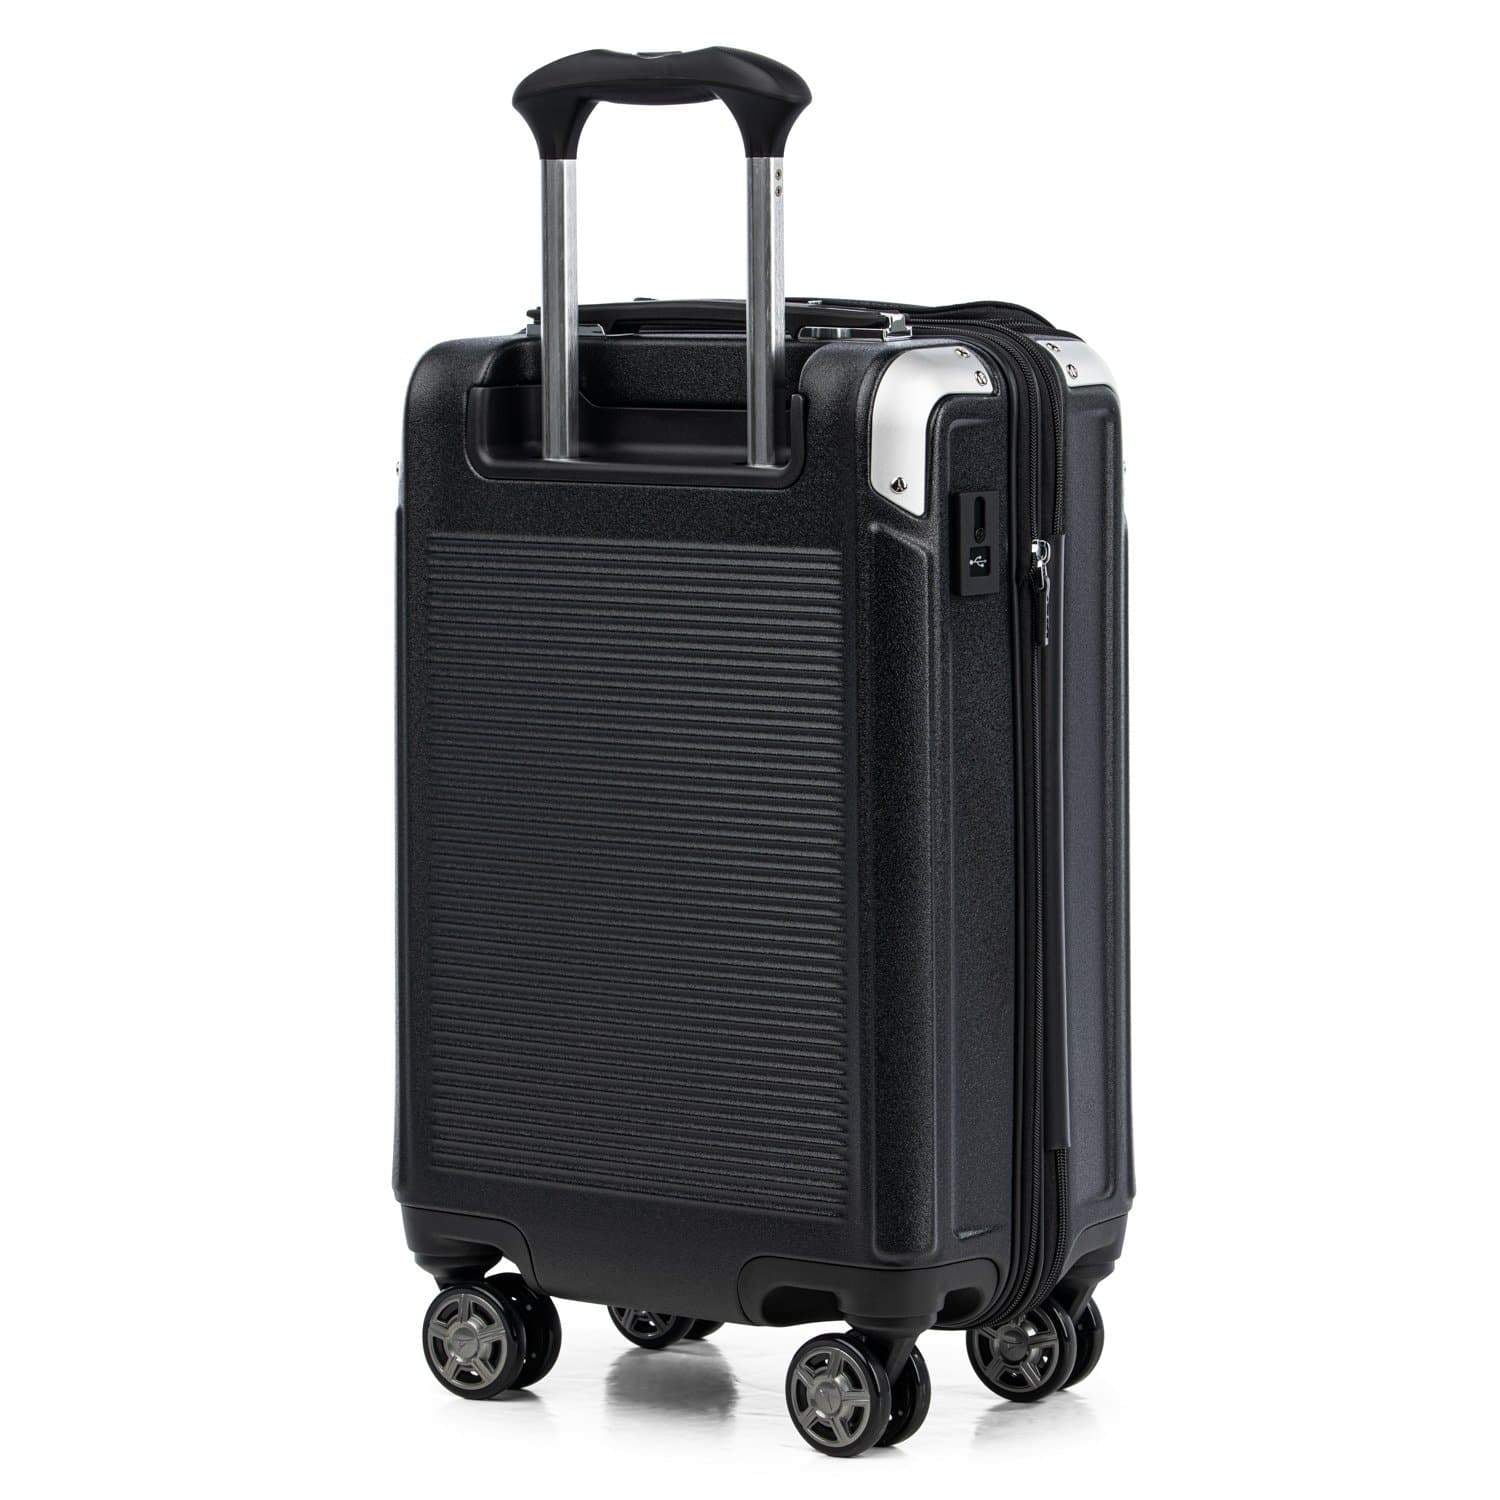 Off-White Transparent Luggage RIMOWA size H 21in x W 15in x D 9in